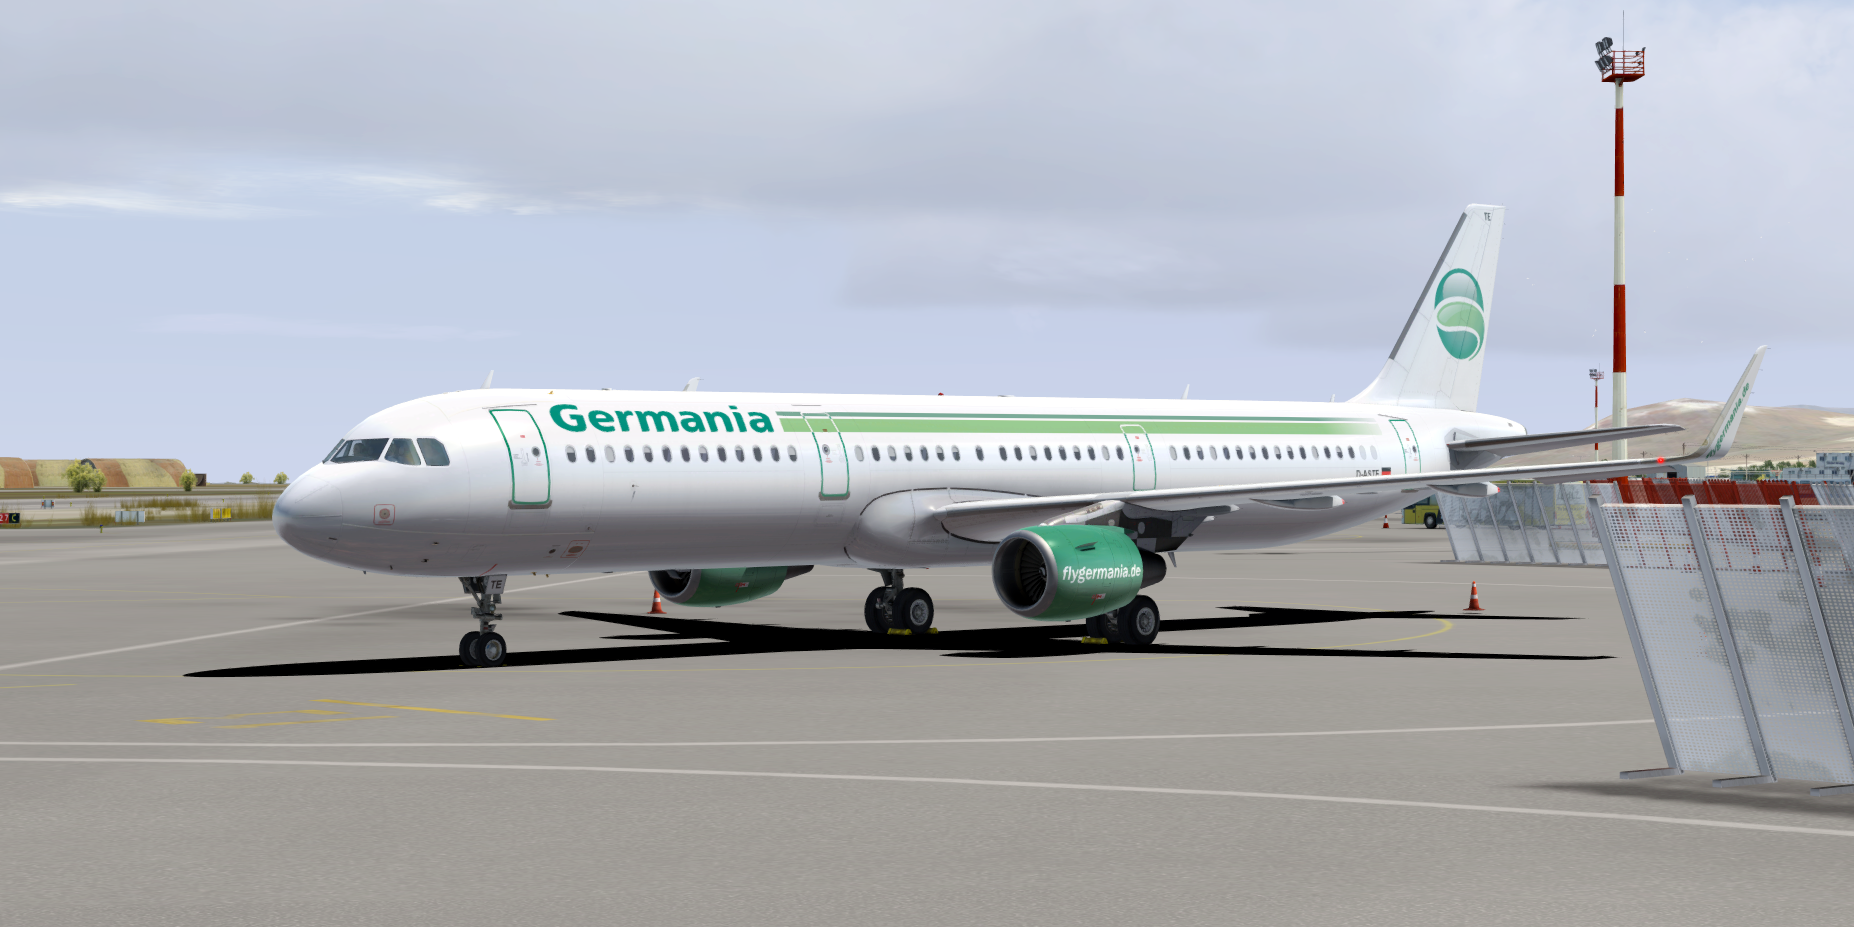 More information about "Airbus A321 CFM Germania D-ASTE"